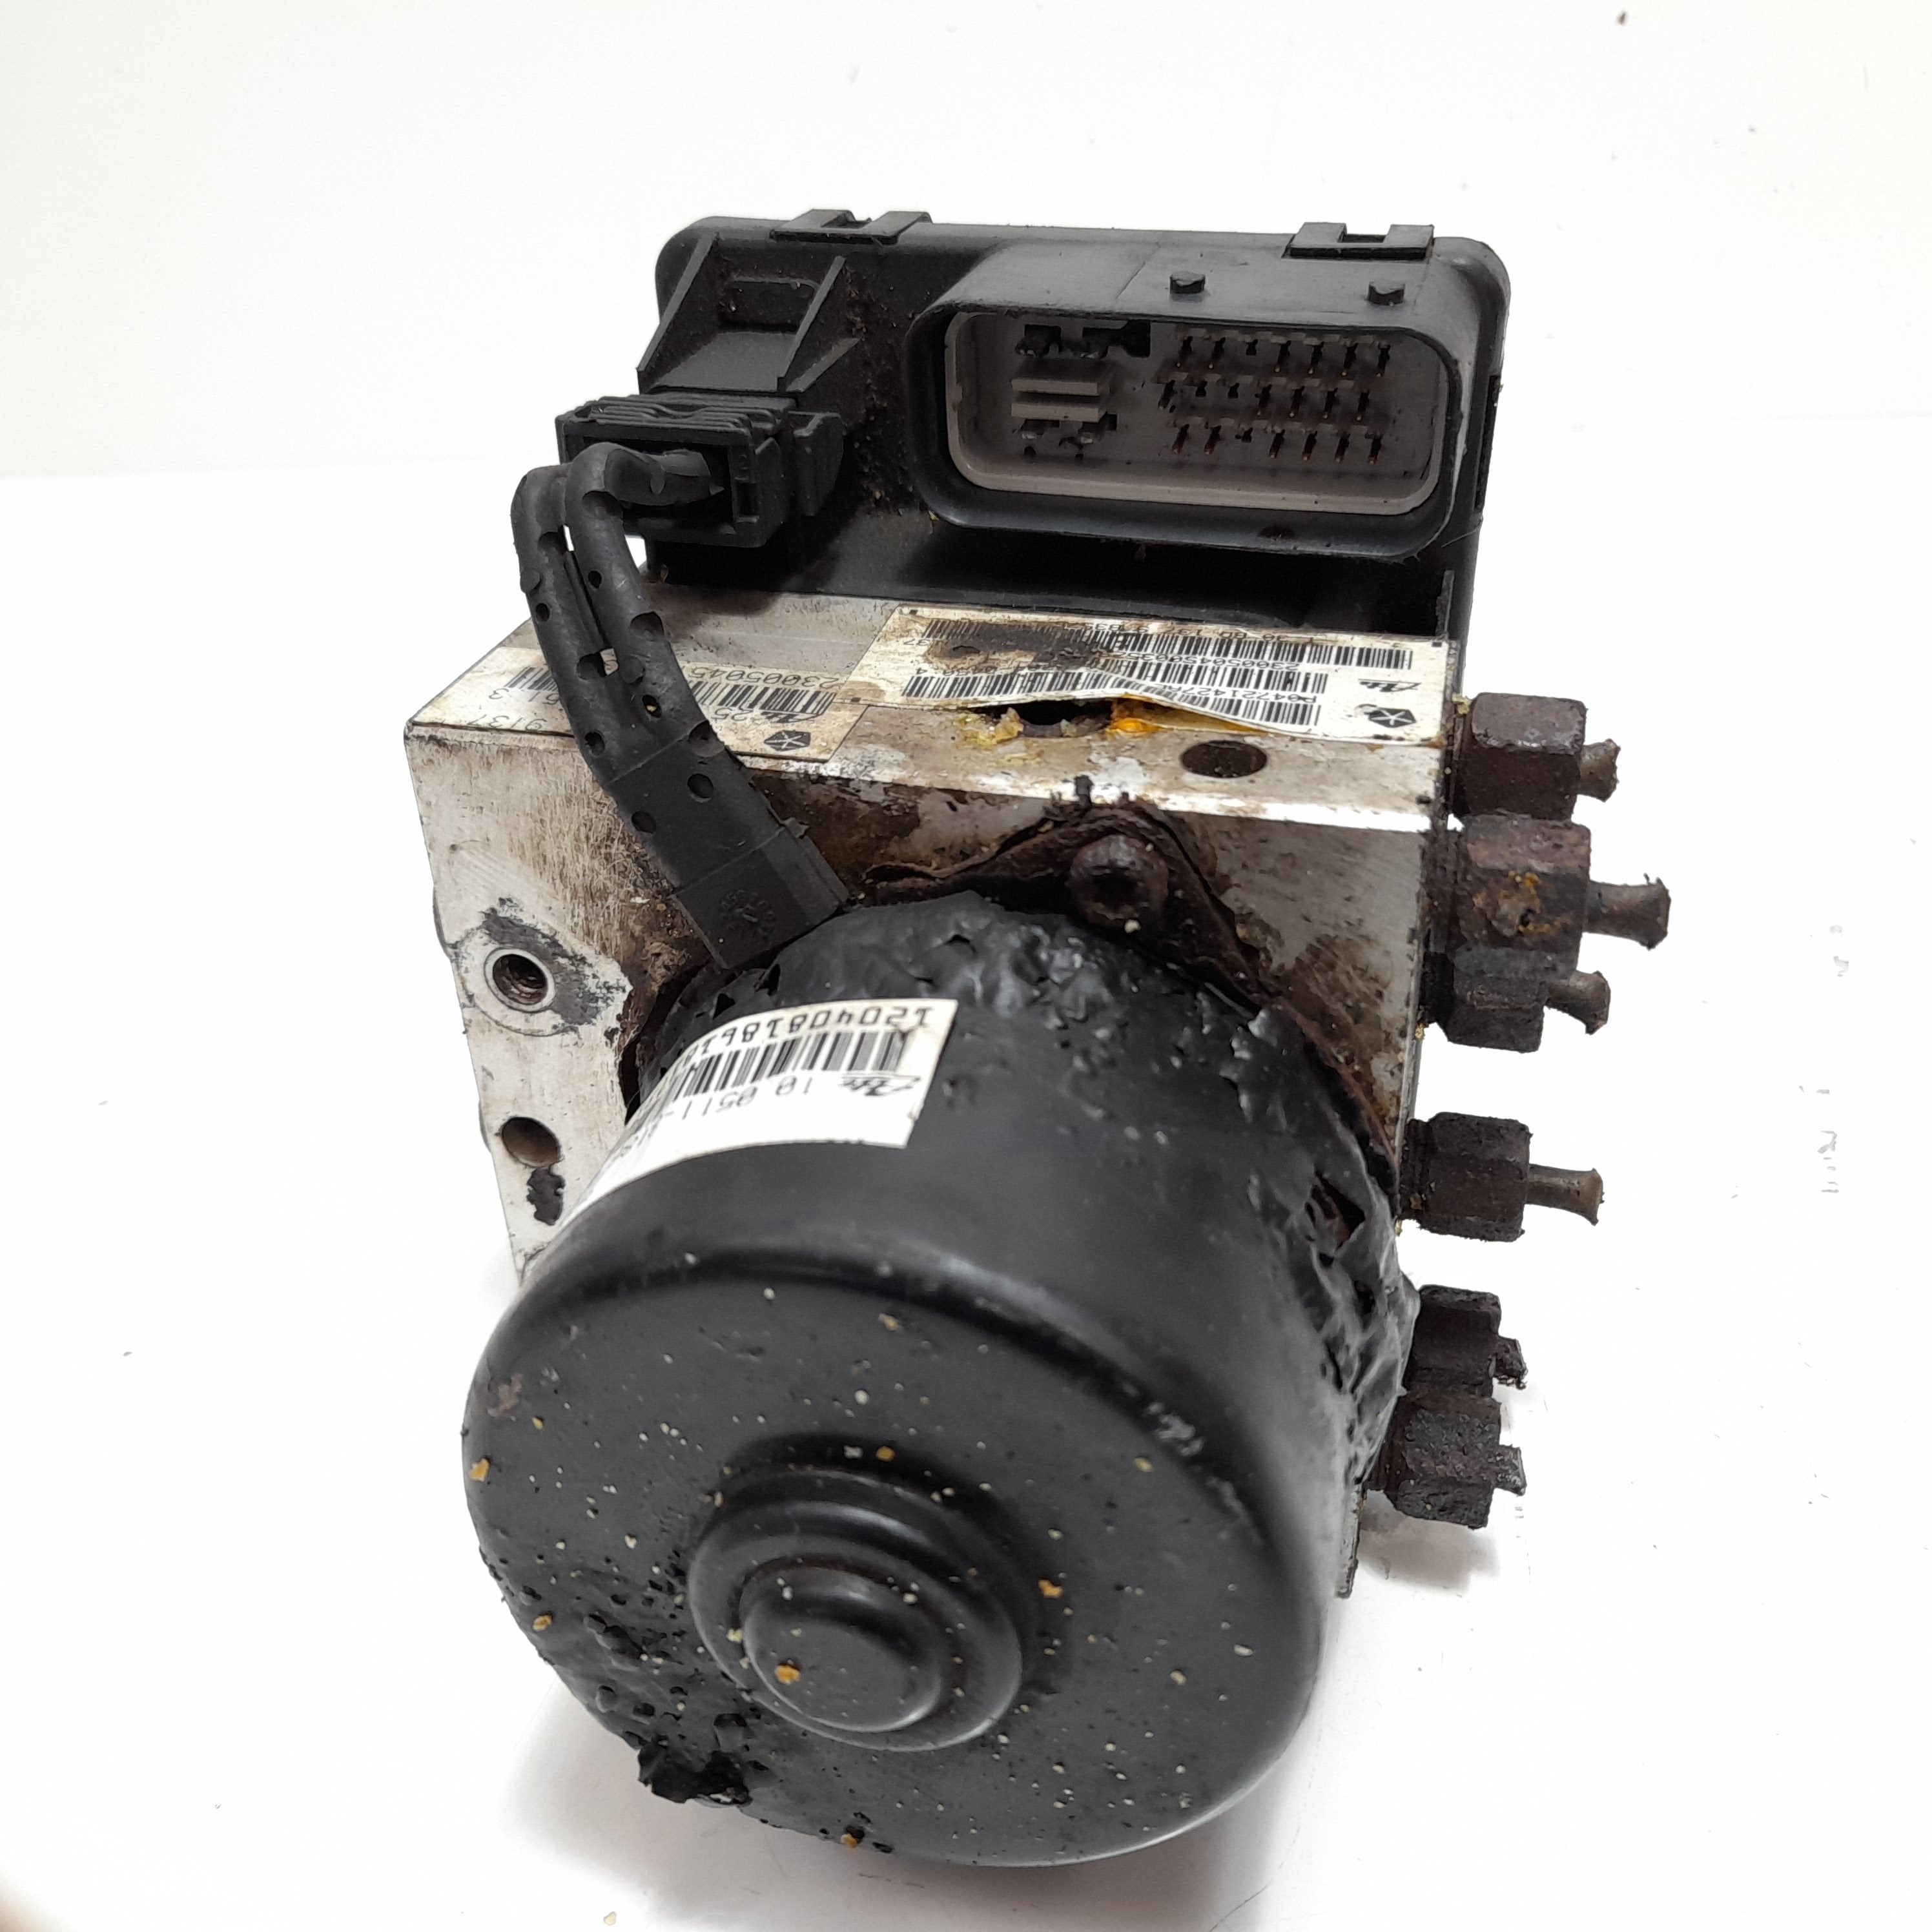 OPEL Voyager 2 generation (1990-1995) ABS Pump P04721427AE 21993955